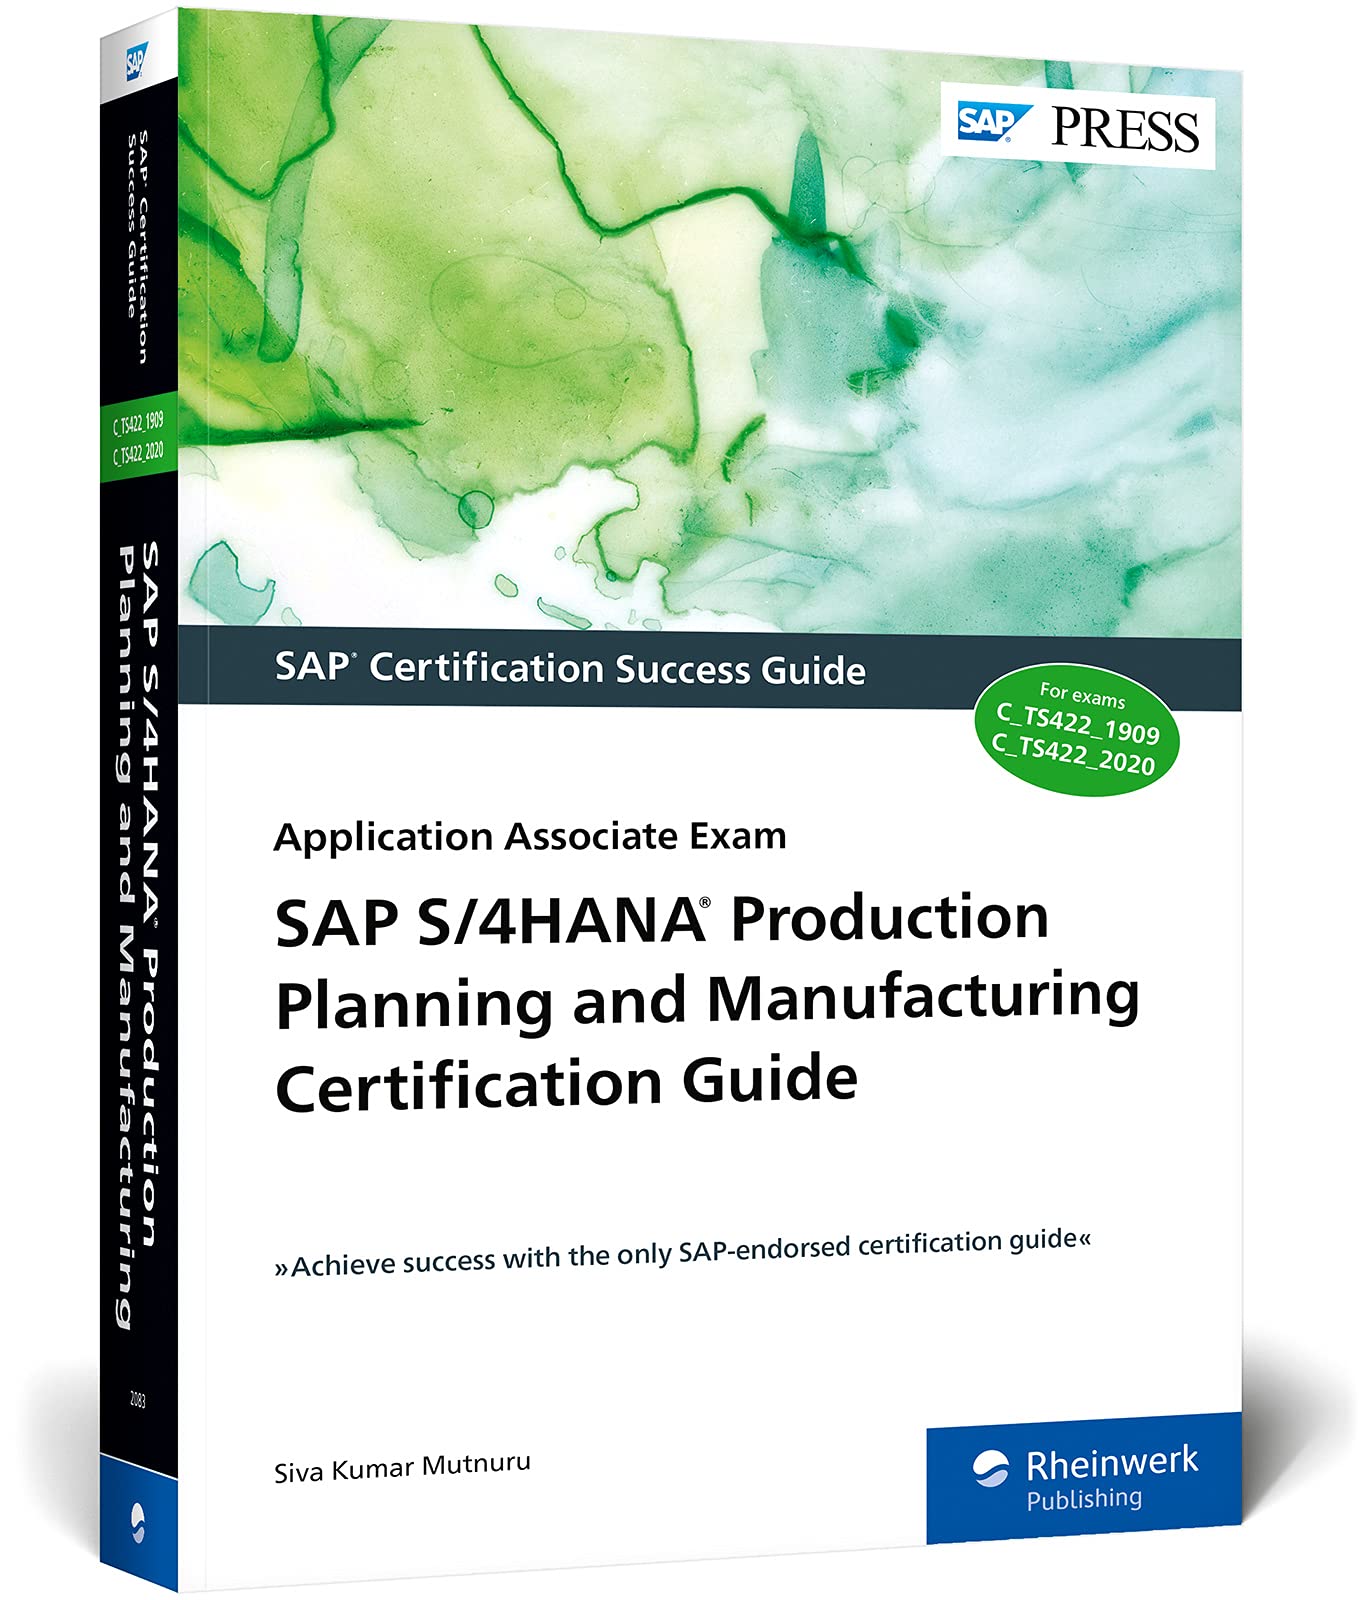 SAP S/4HANA Production Planning and Manufacturing Certification Guide: Application Associate Exam - Epub + Converted Pdf